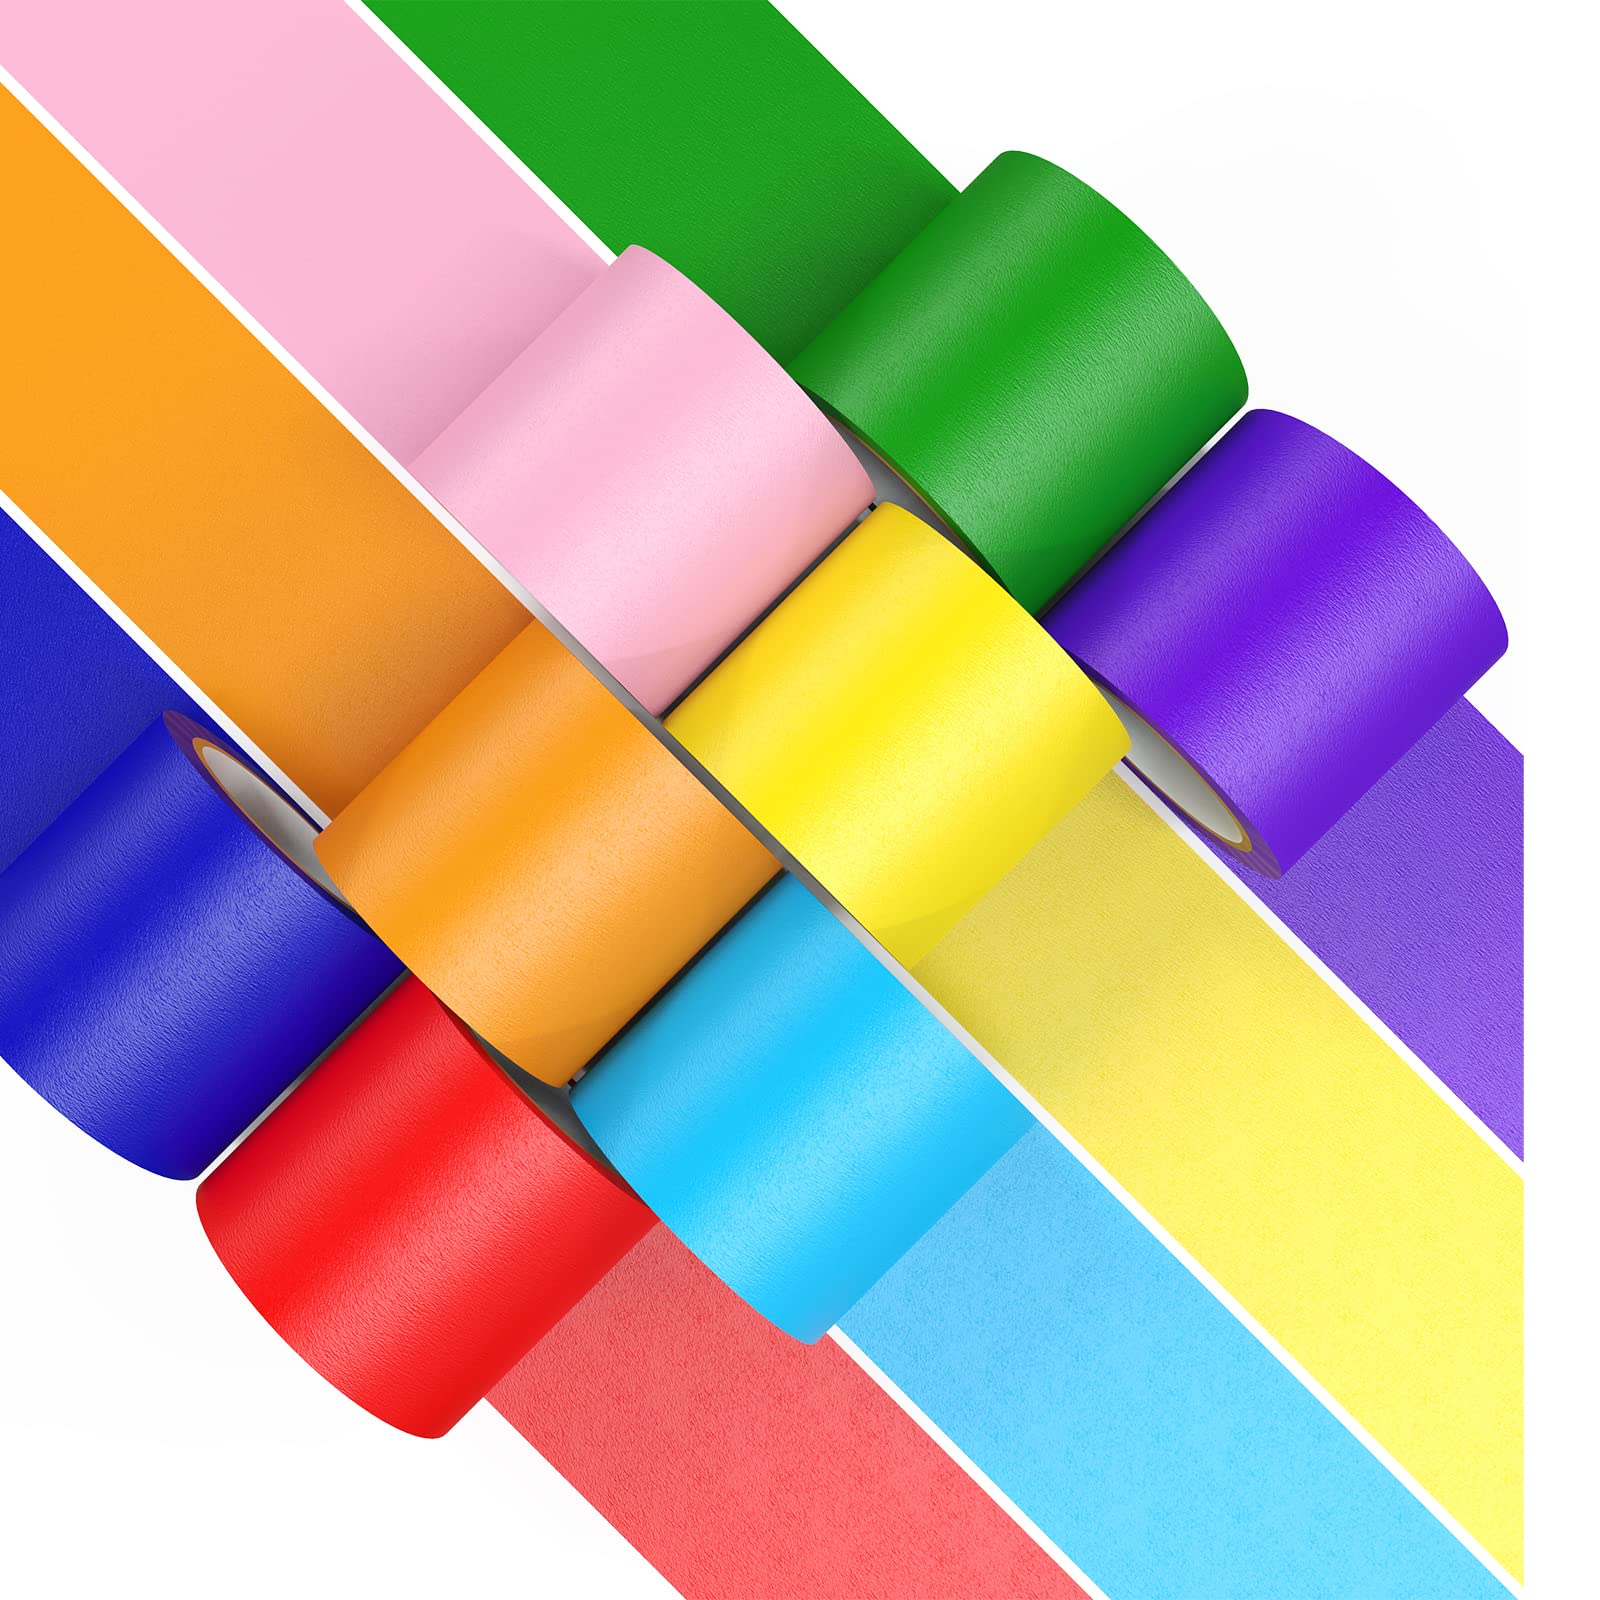  8 Rolls Colored Masking Tape Rainbow Colors Painters Tape  Colorful Craft Art Paper Tape for Kids Labeling Arts Crafts DIY Decorative  Coding Decoration Teaching Supplies, 0.6 Inch x 16 Yard, 8